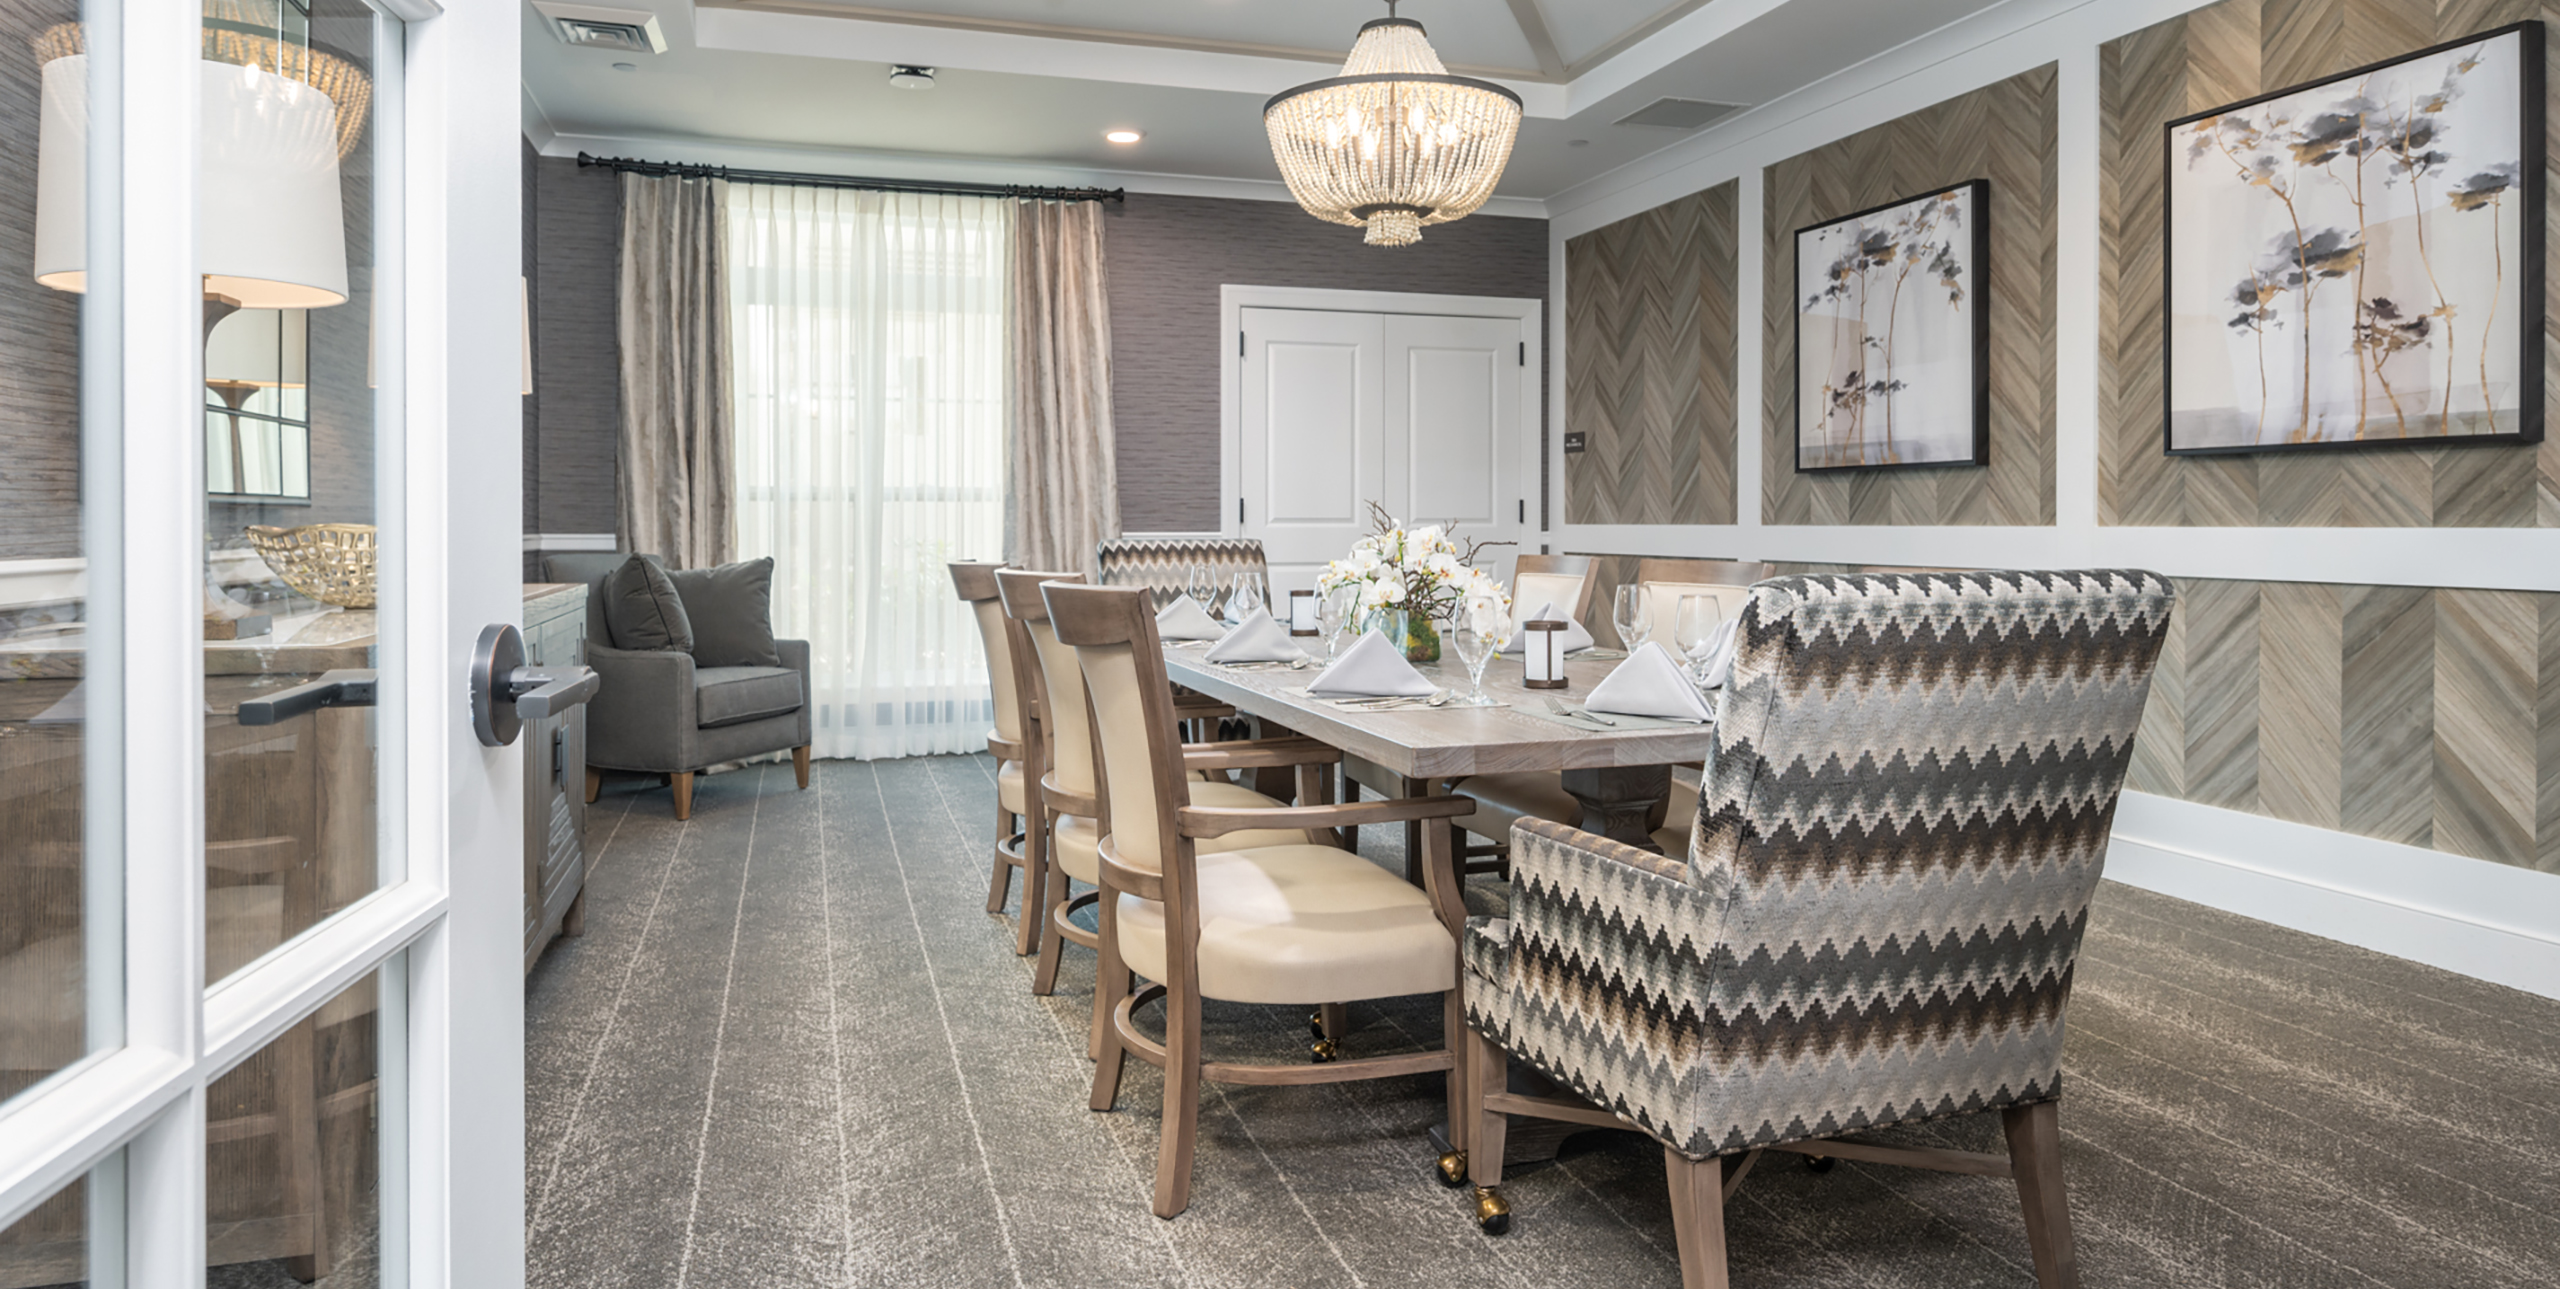 The private dining room at Brightview Senior Living in Port Jeff